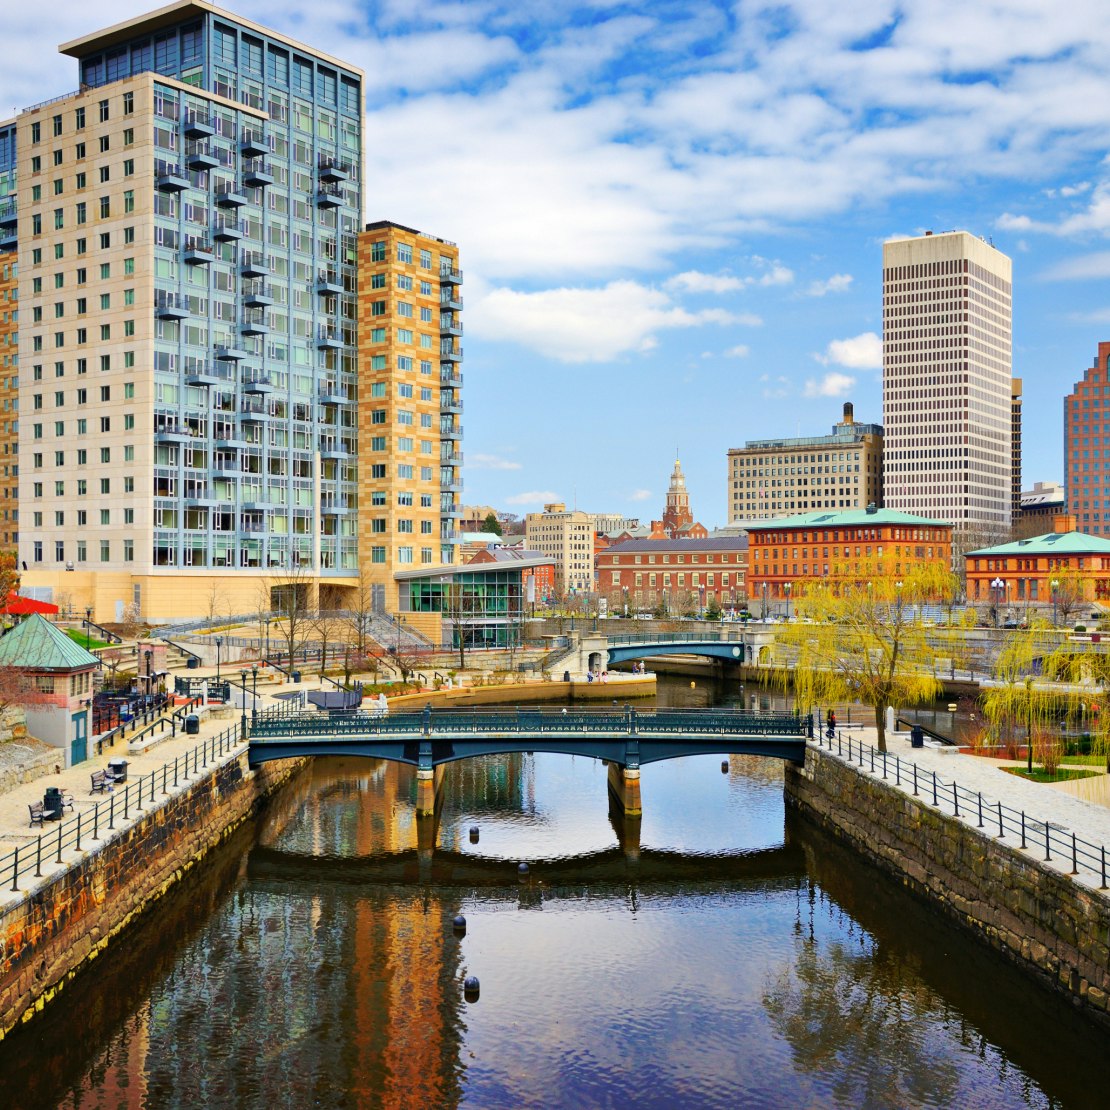 Providence, Rhode Island cityscape at Waterplace Park.; Shutterstock ID 150002120; Your name (First / Last): Lauren Keith; GL account no.: 65050; Netsuite department name: Content Asset; Full Product or Project name including edition: Guides Project Eastern USA